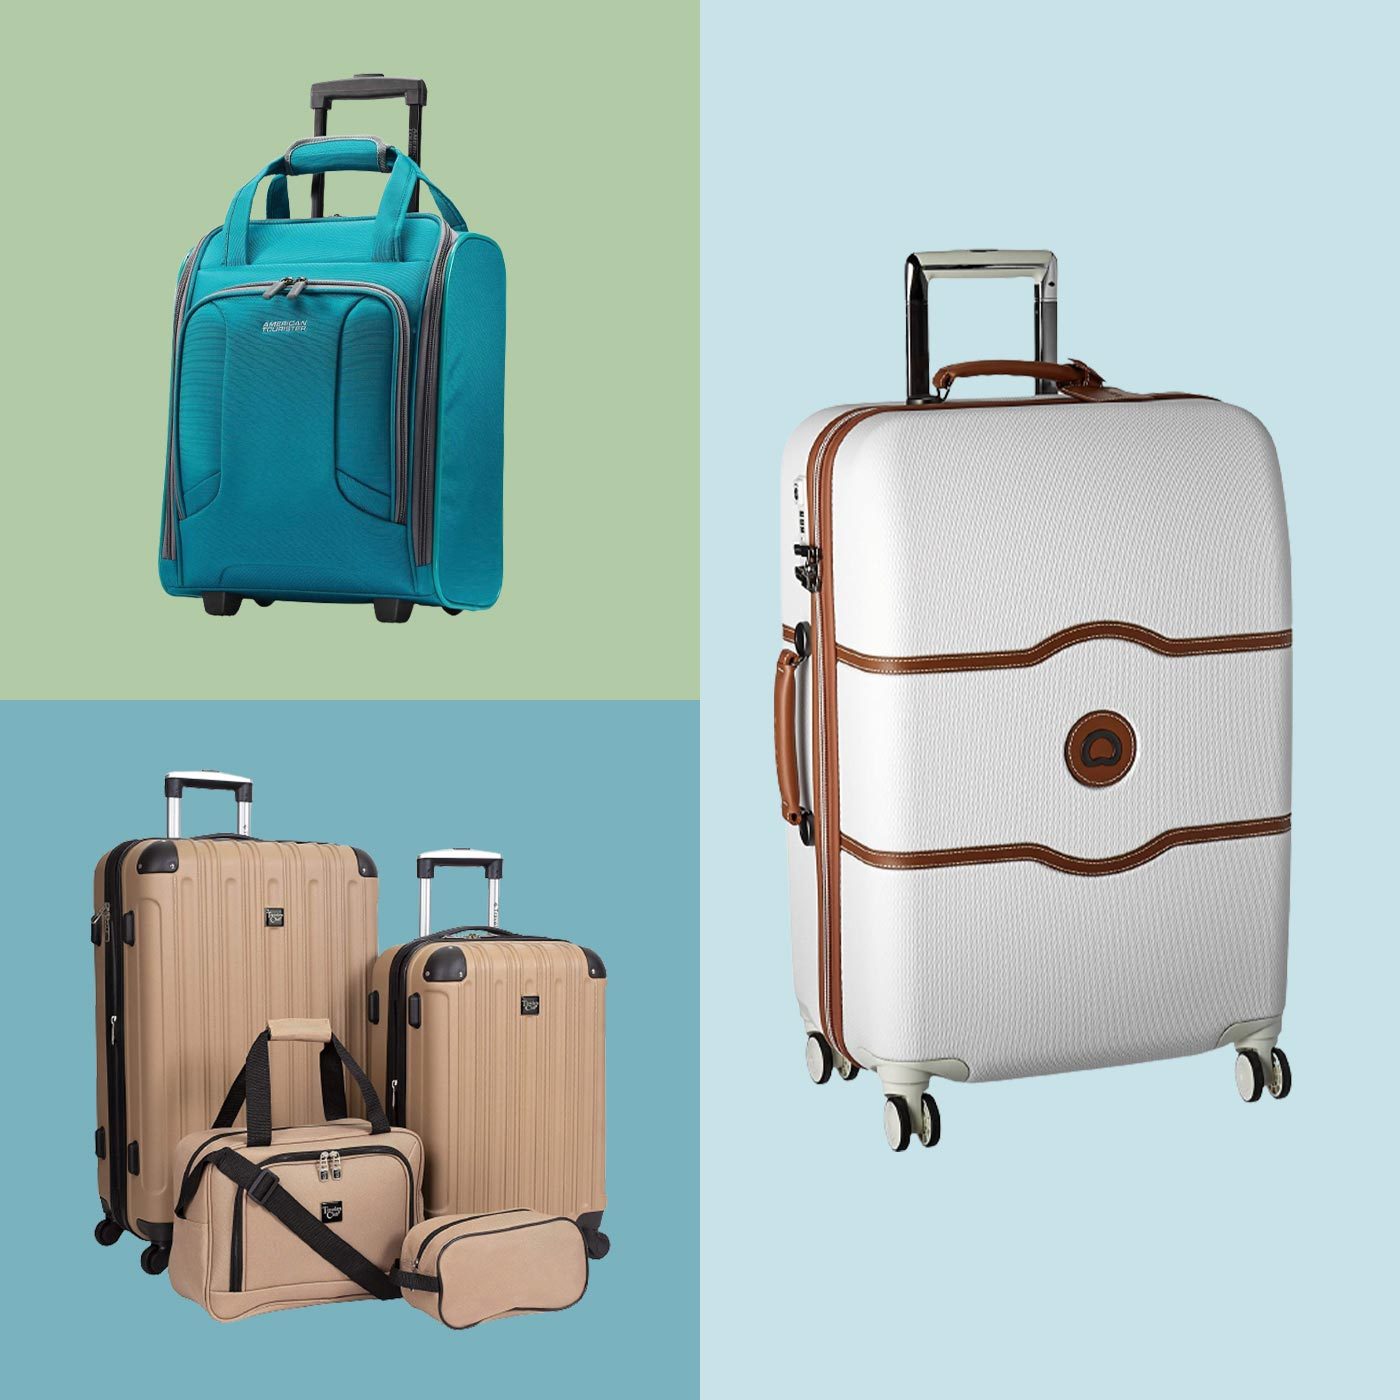 Luggage: Shop Suitcases & Travel Bags For Your Next Getaway